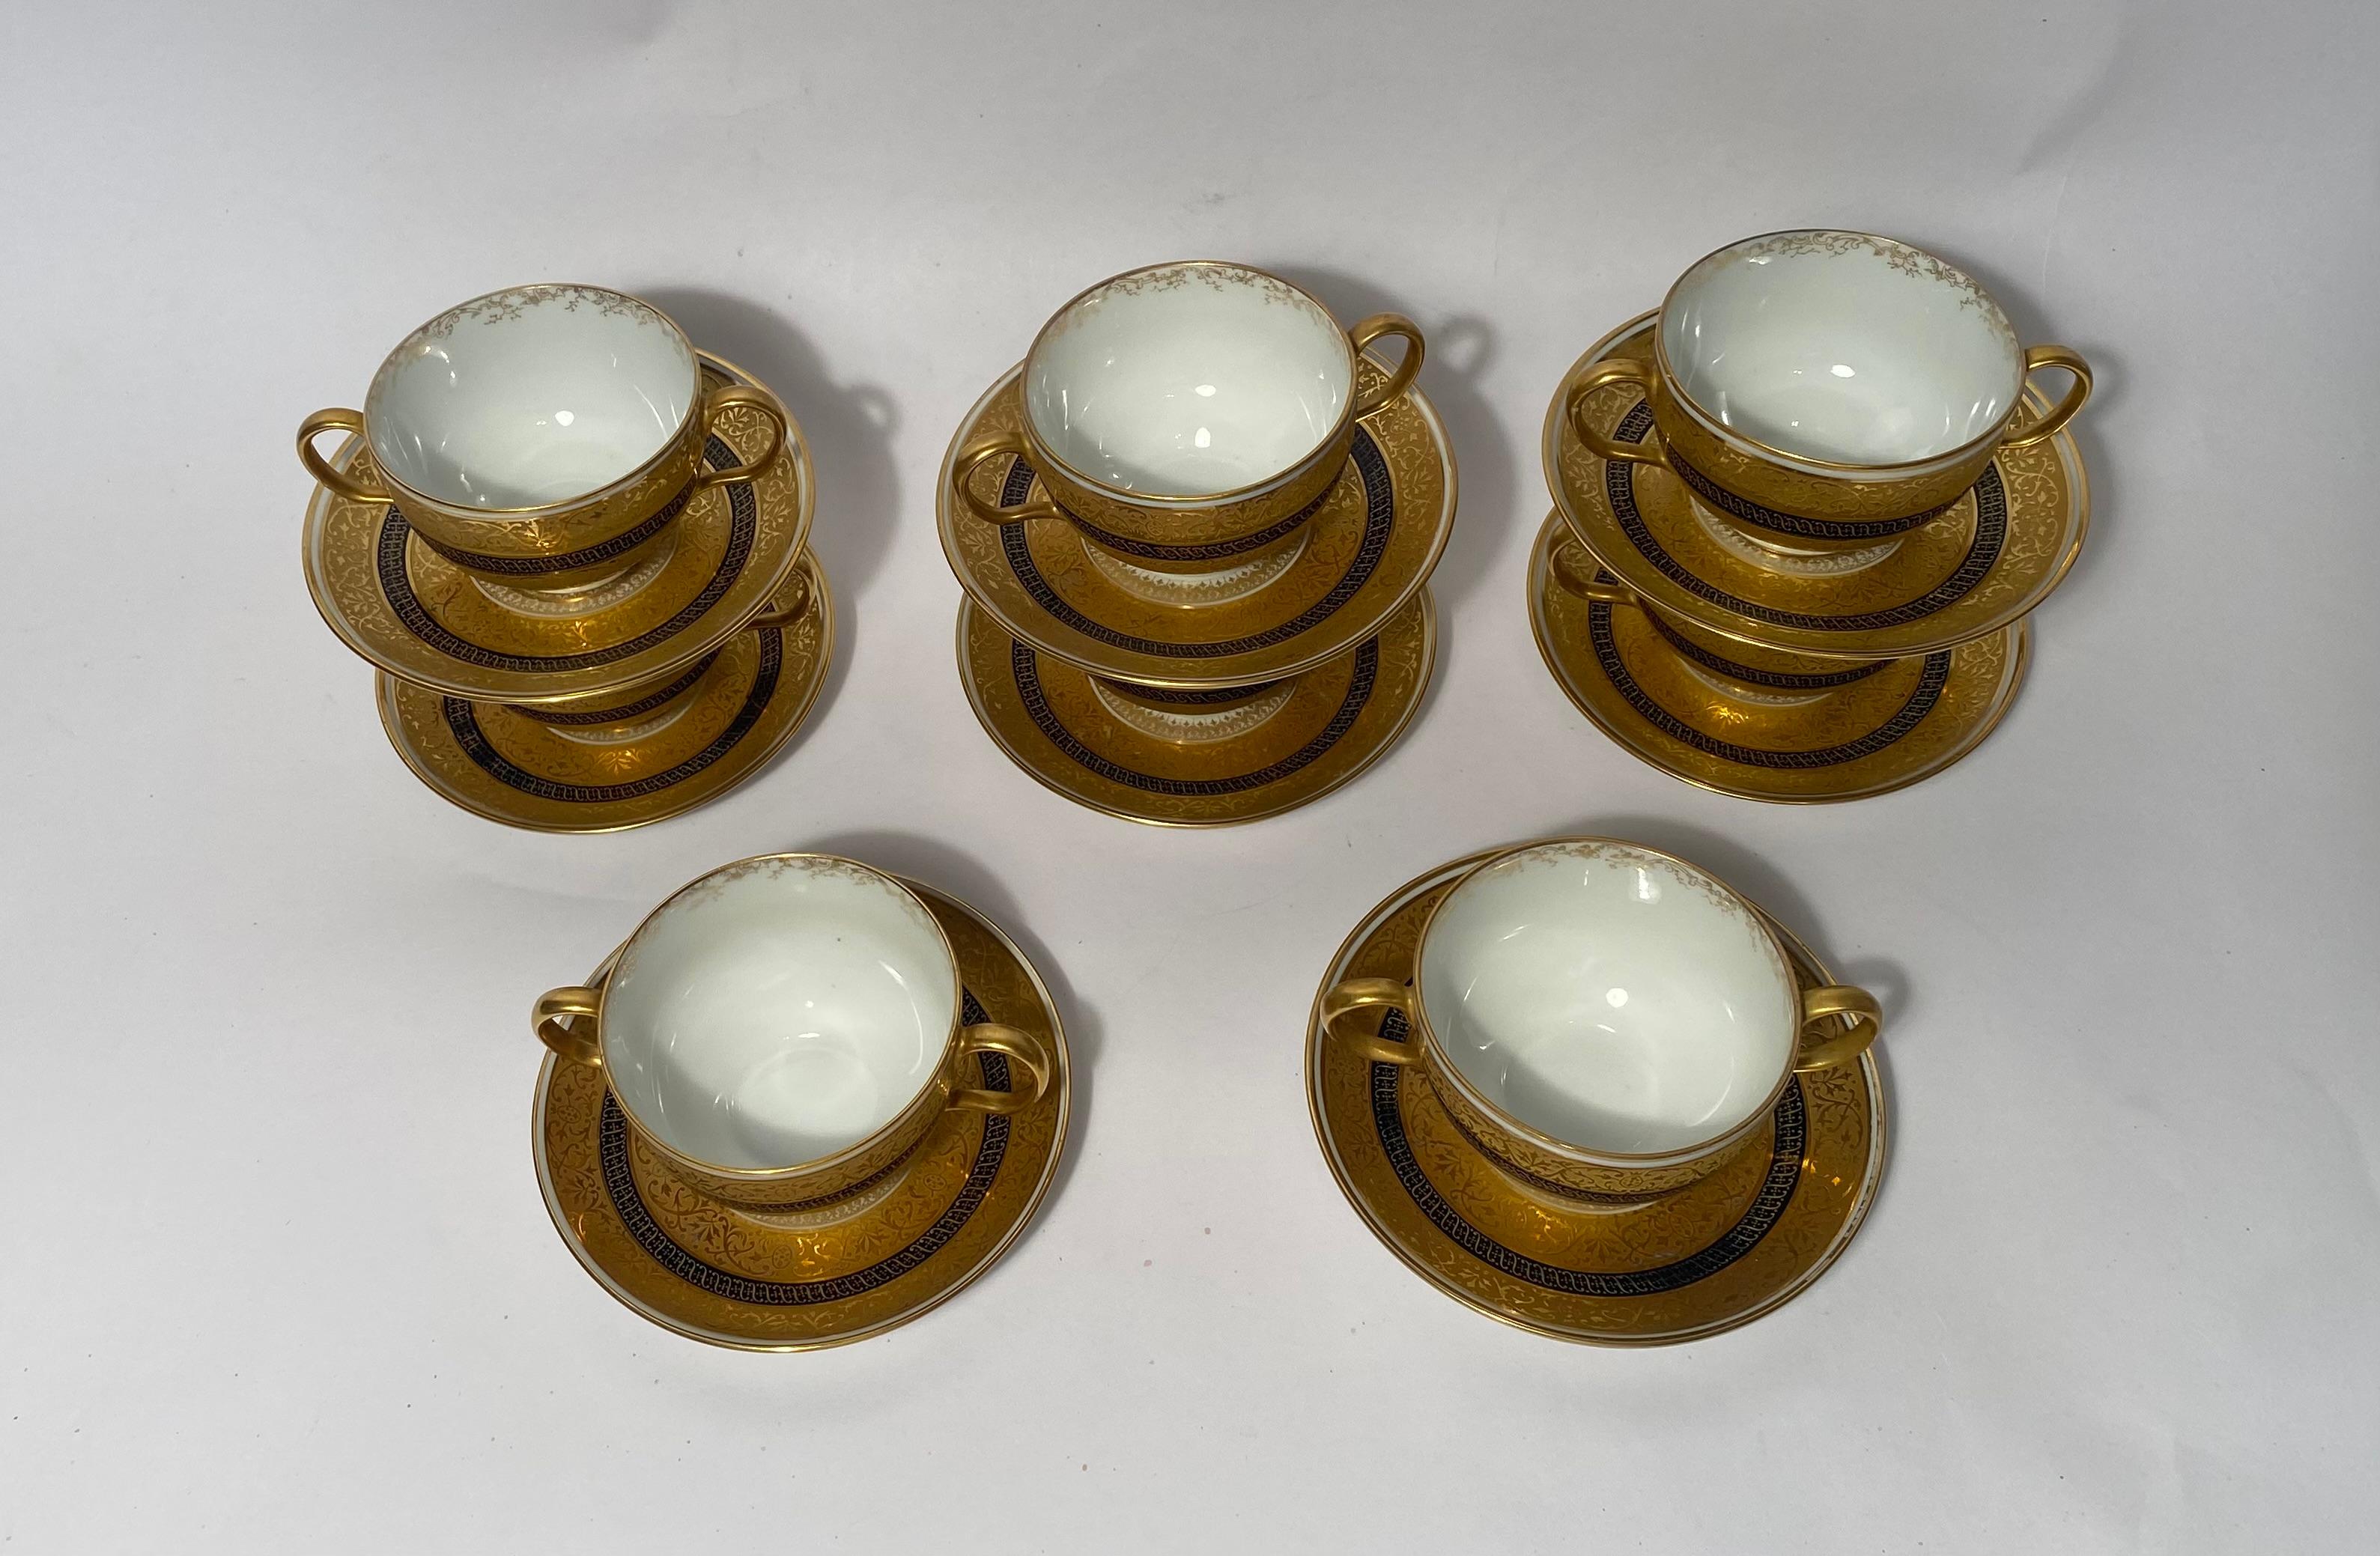 Gold A Set of 8 Cream Soup or Dessert Cups & Saucers. Antique Limoges Circa 1890 